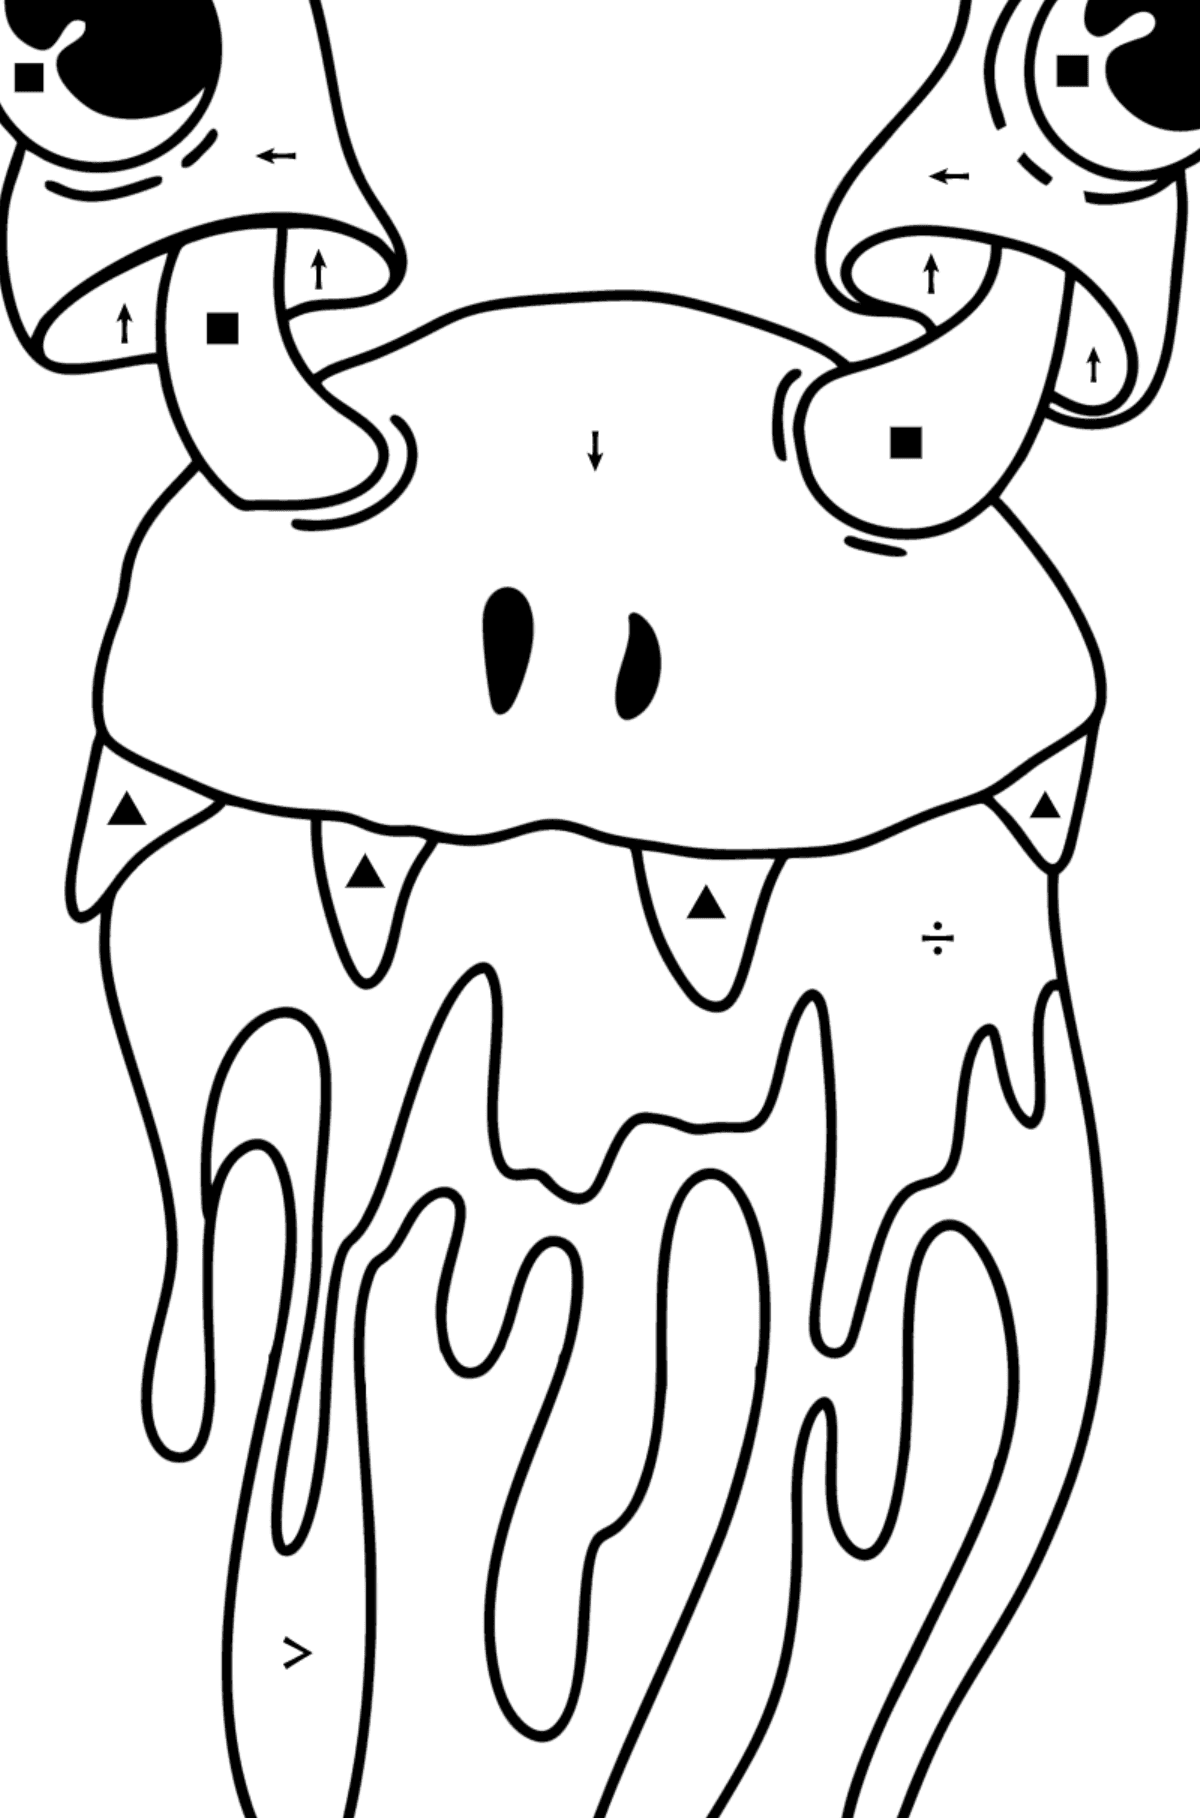 Cartoon monster face coloring page - Coloring by Symbols for Kids